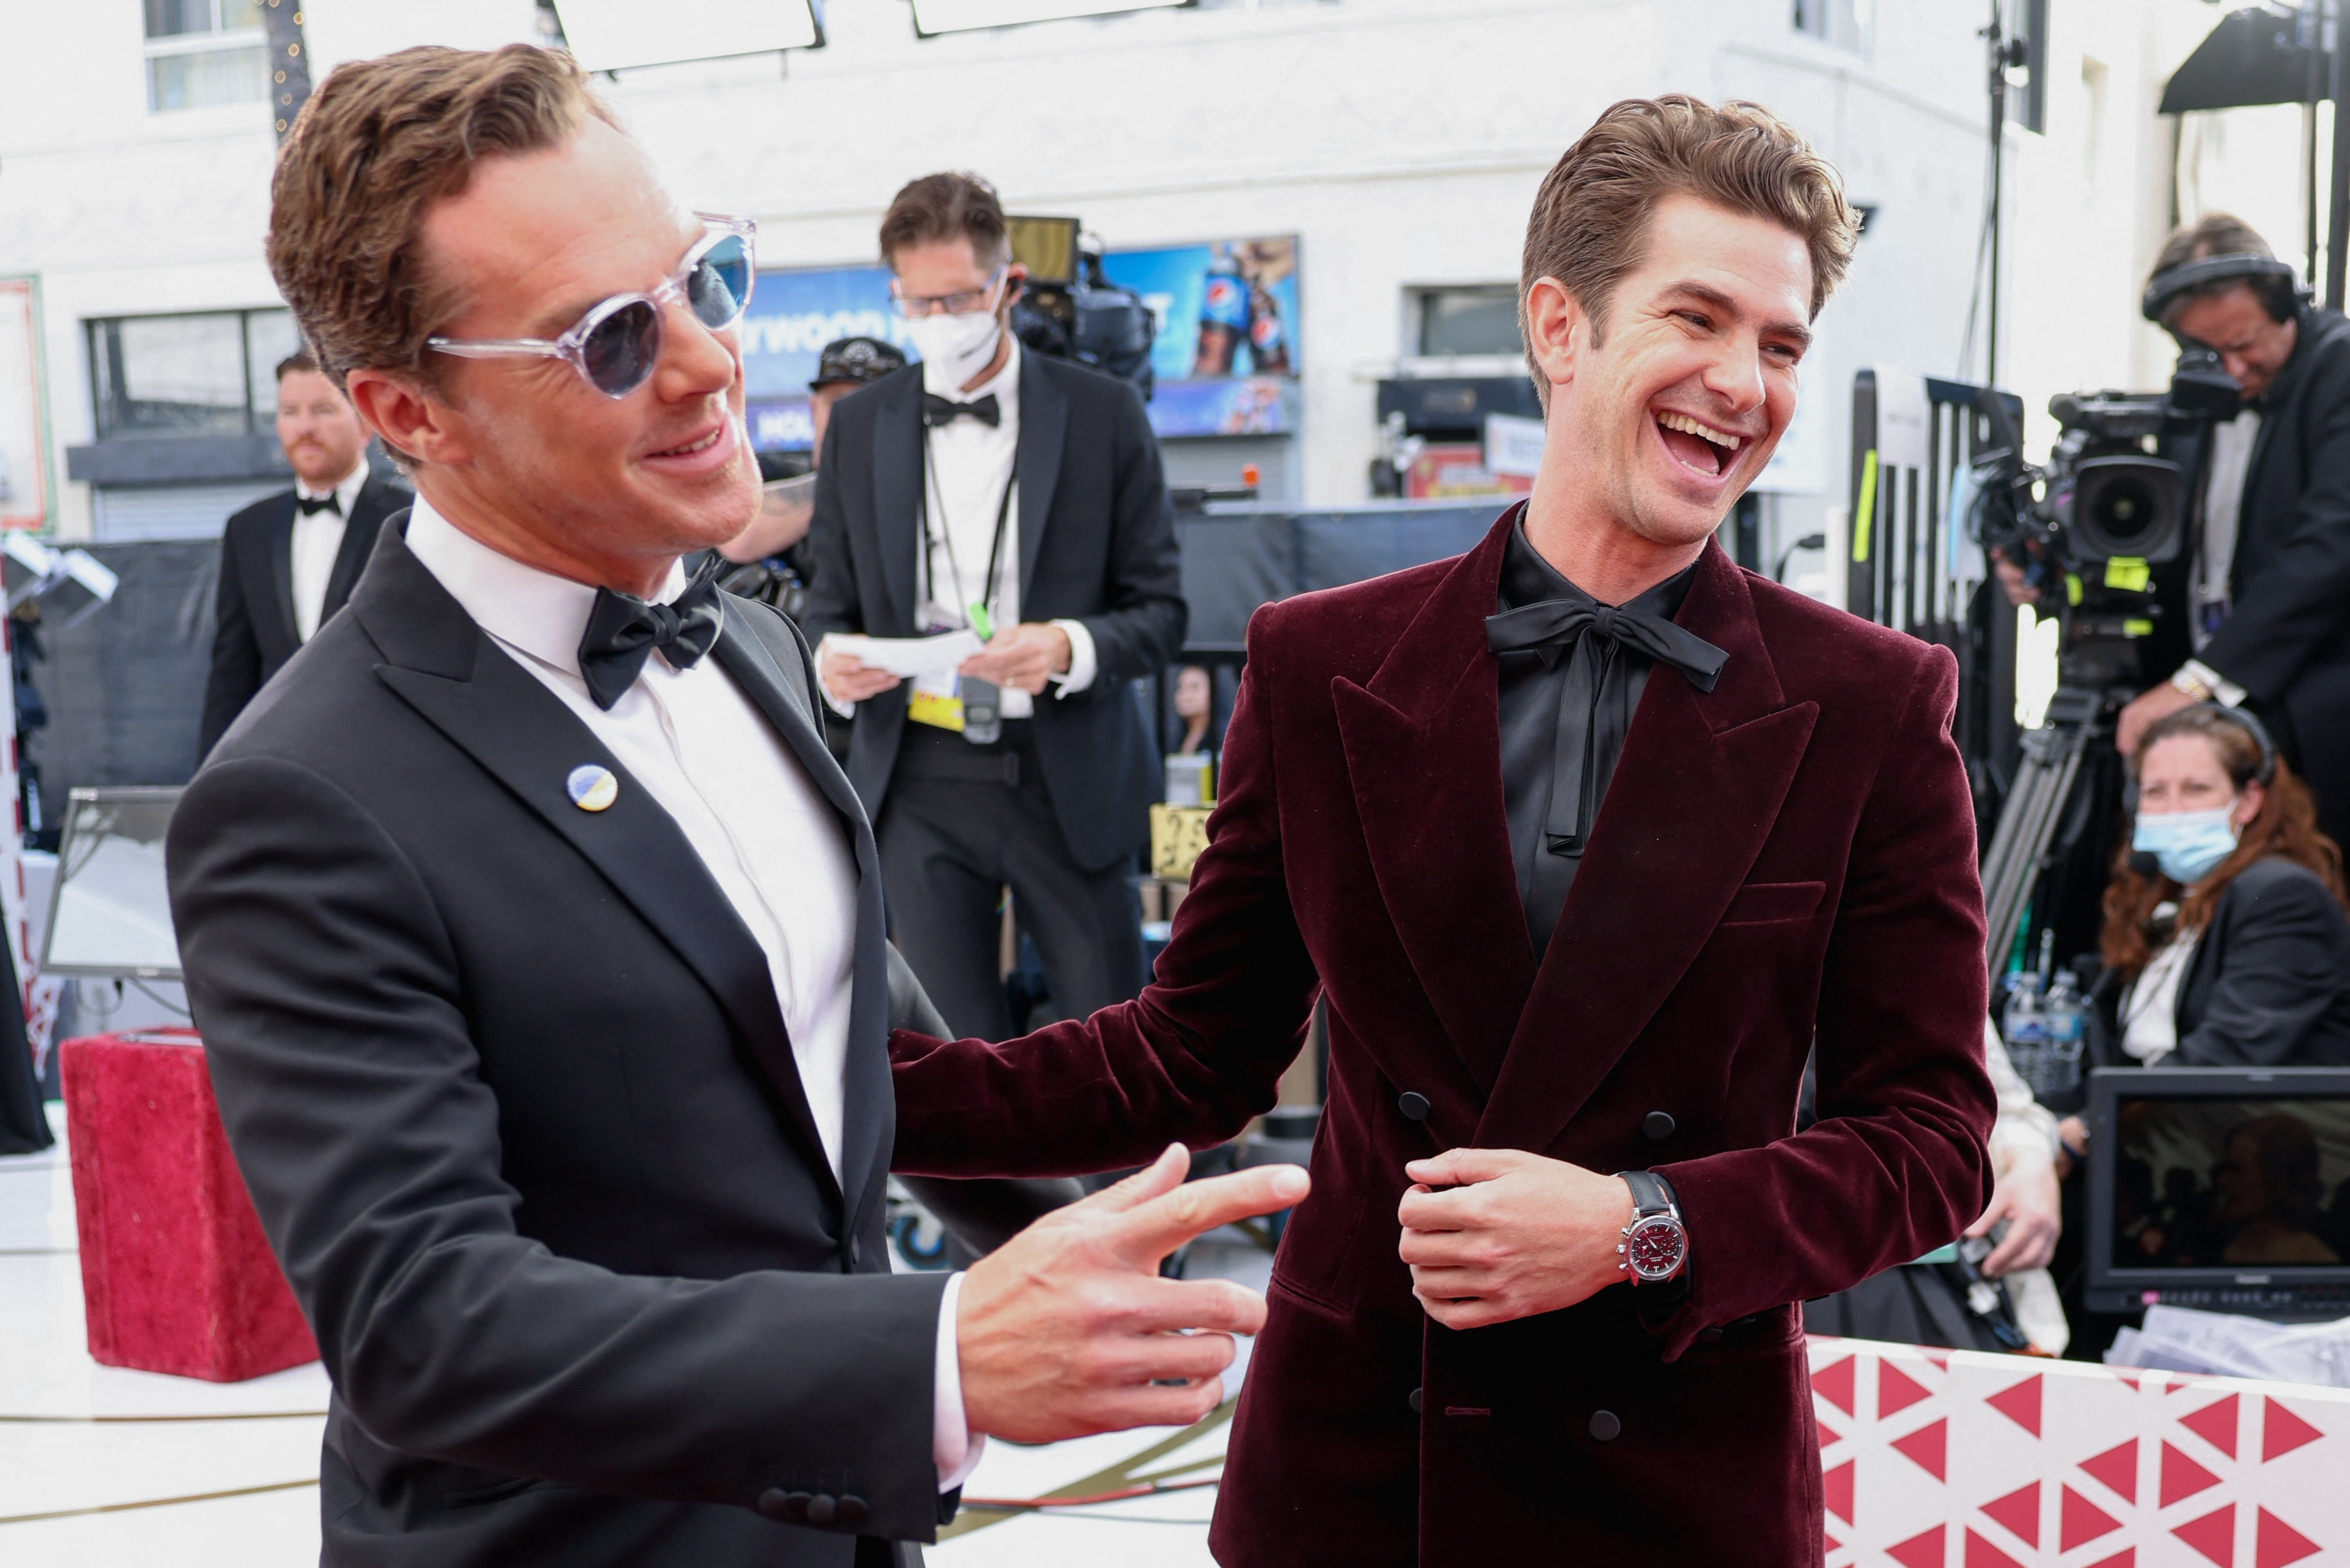 Benedict Cumberbatch and Andrew Garfield pose on the red carpet during the Oscars arrivals at the 94th Academy Awards in Hollywood, Los Angeles, California, U.S., March 27, 2022. REUTERS/Mike Blake